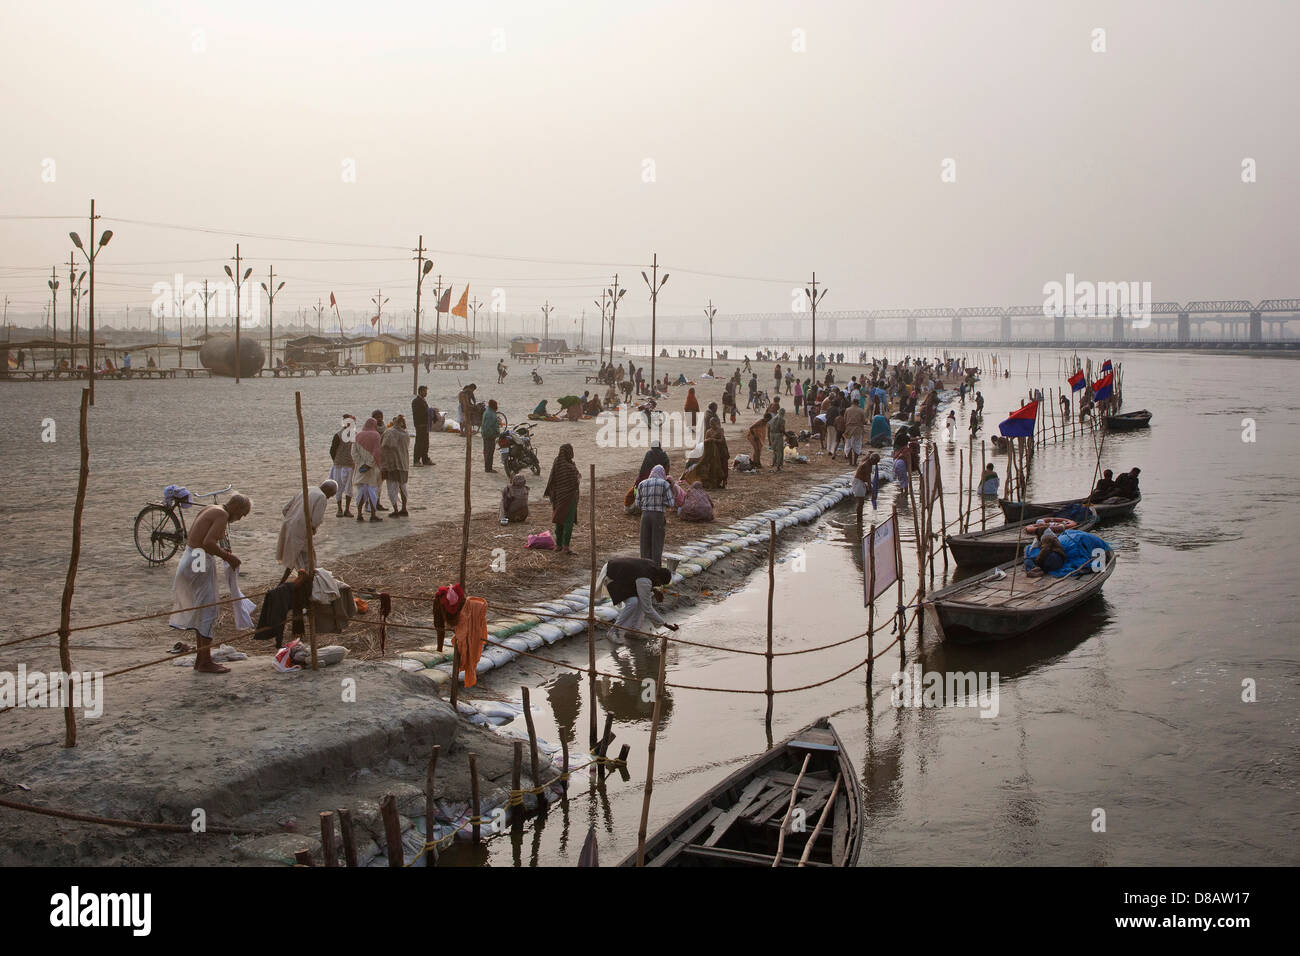 People bathing in the Ganges River at the Kumbh Mela 2013 in Allahabad, India Stock Photo